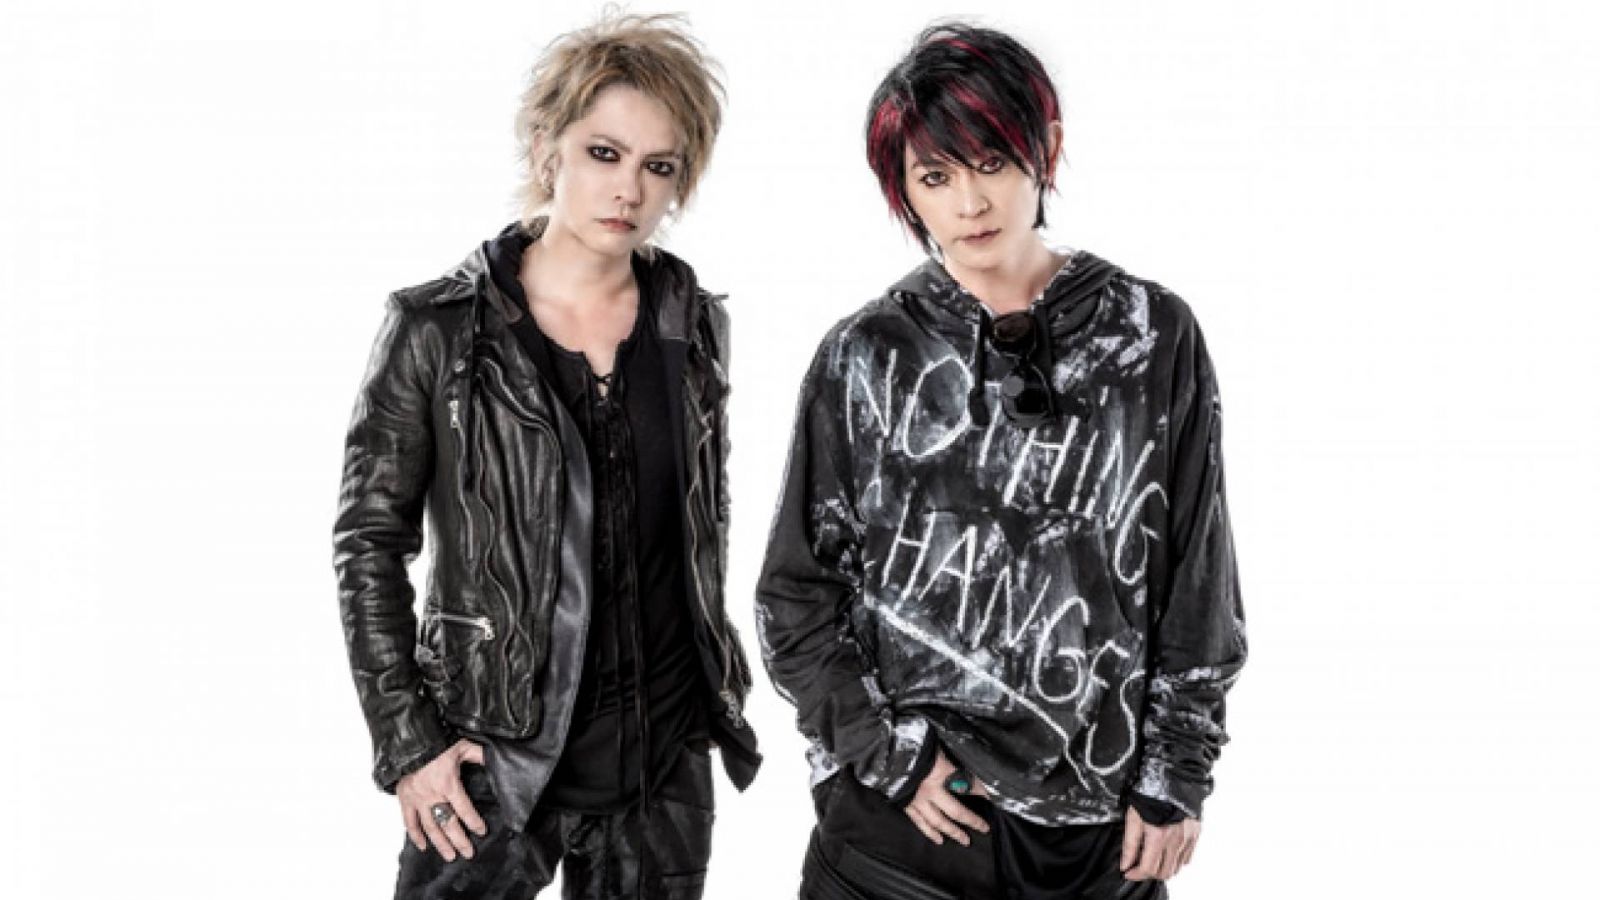 VAMPS © UNIVERSAL MUSIC LLC. All rights reserved.